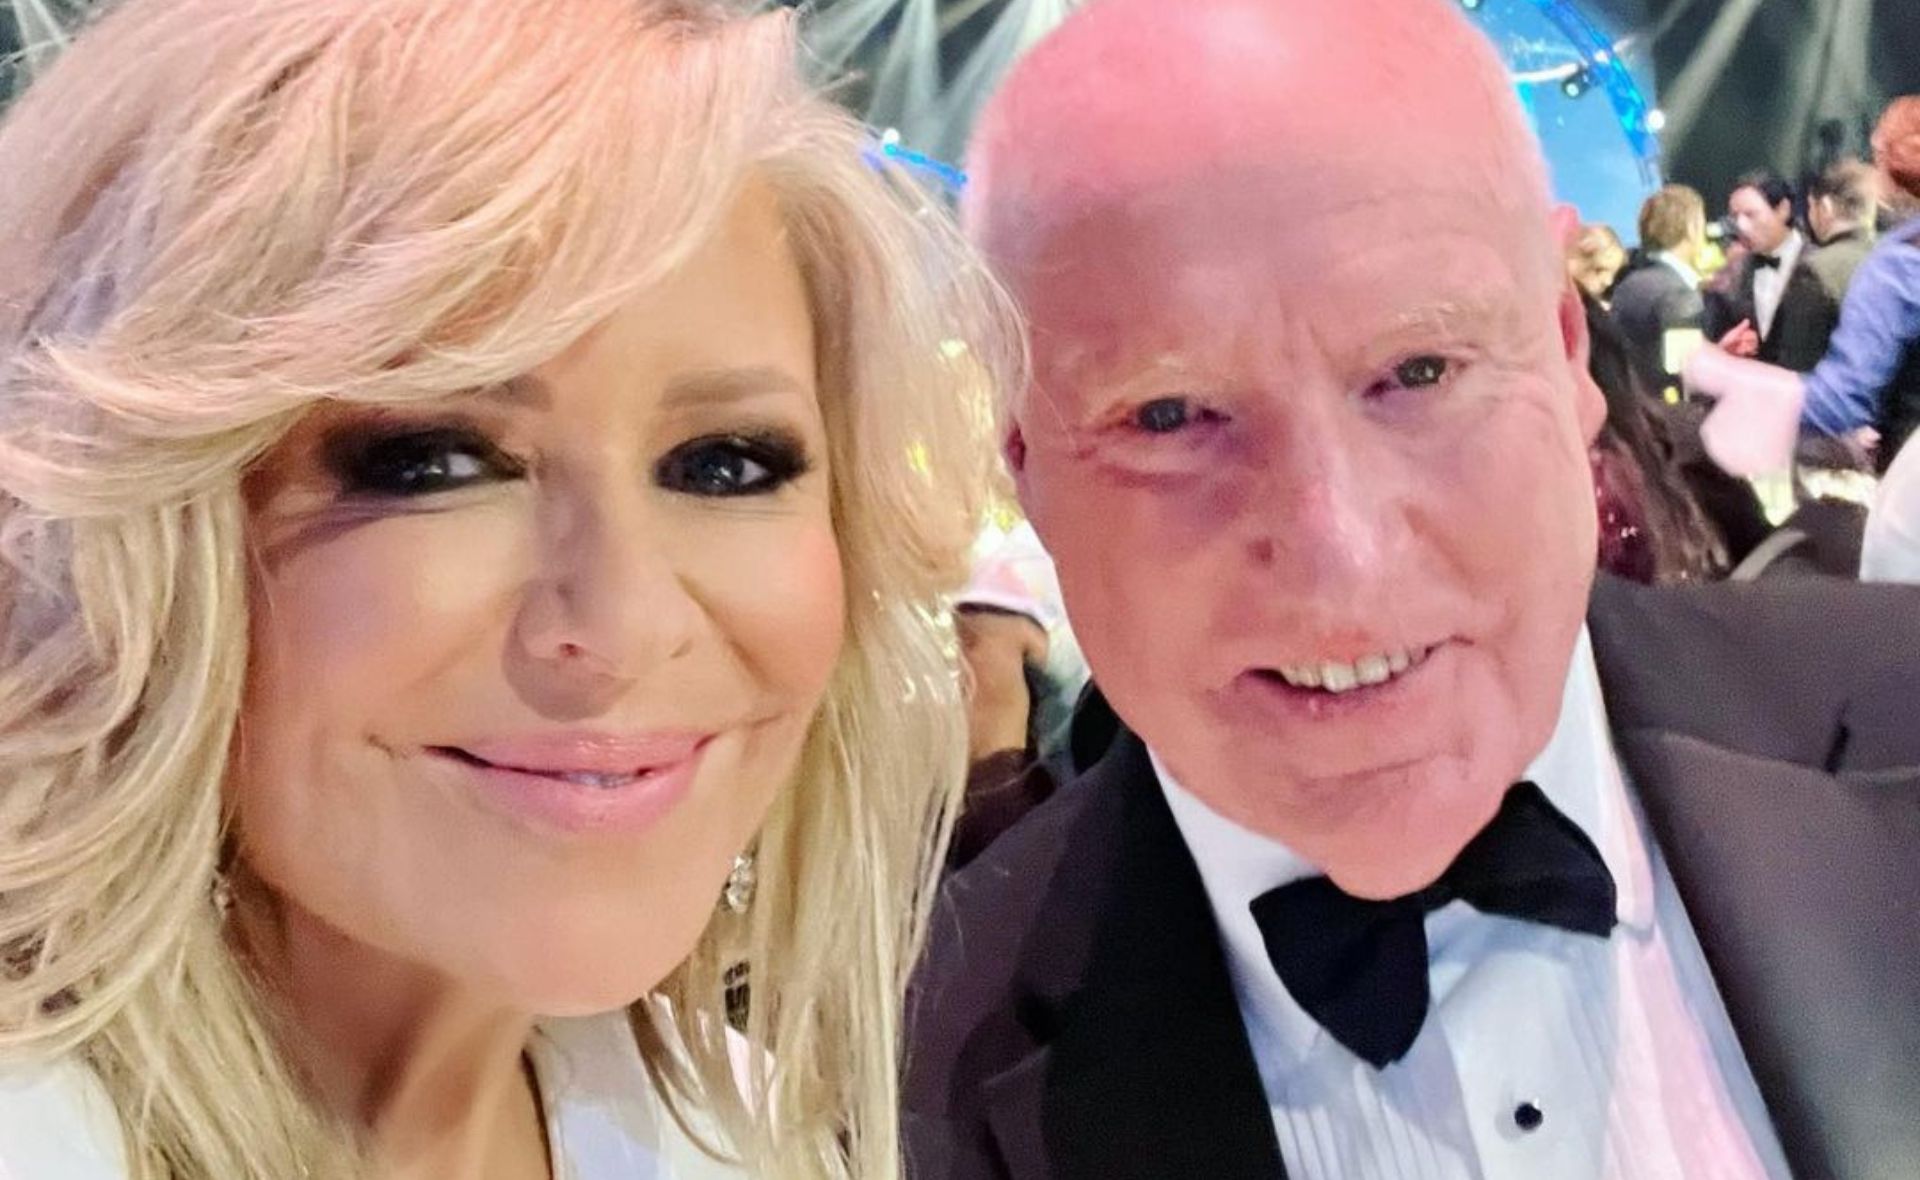 Watch out! Home and Away’s Ray Meagher is a prankster on set according to co-star Emily Symons